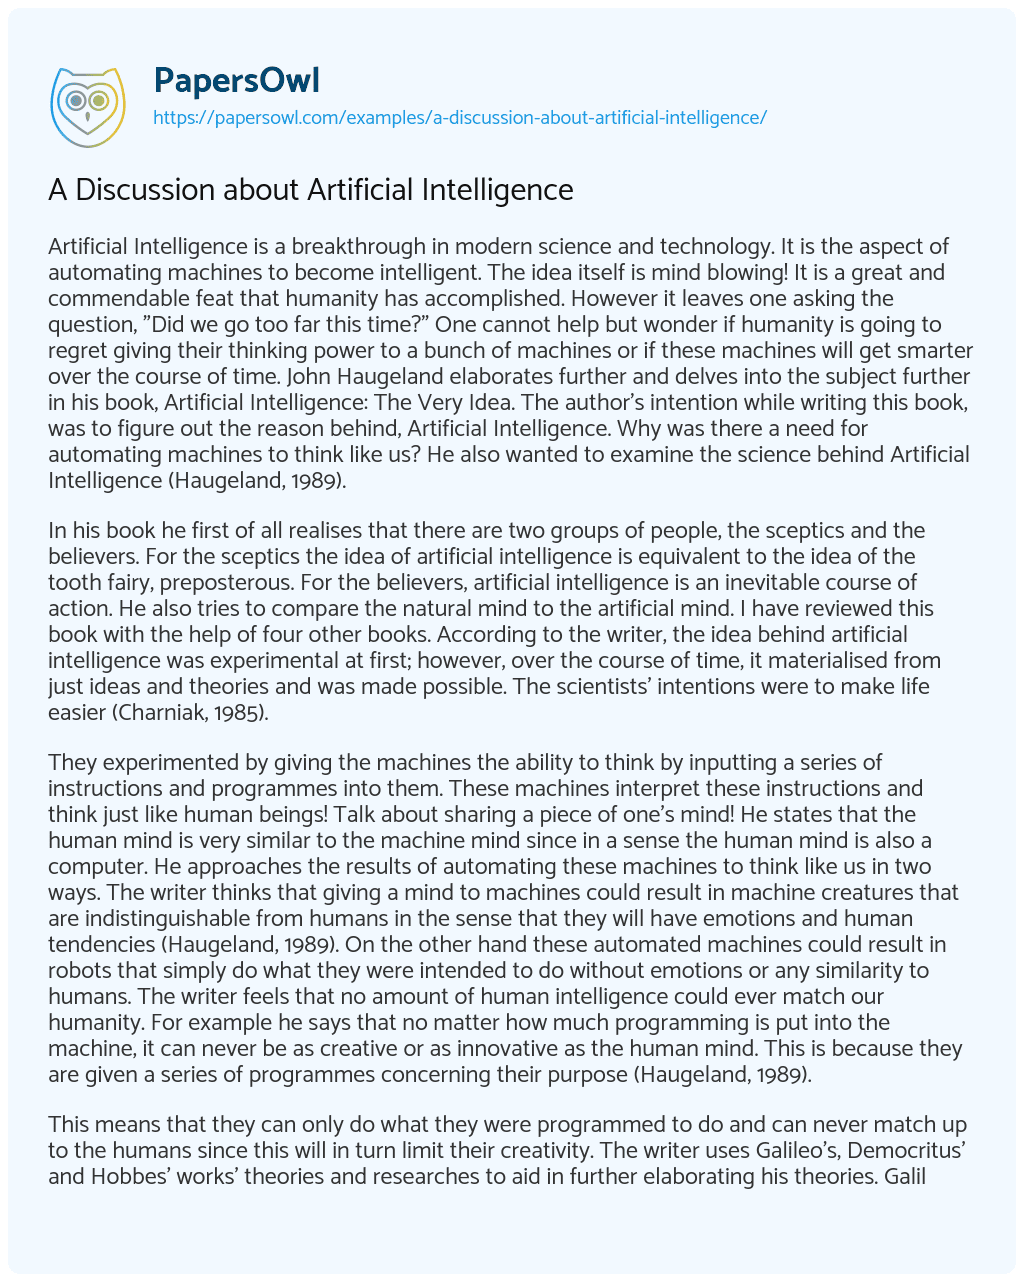 Essay on A Discussion about Artificial Intelligence